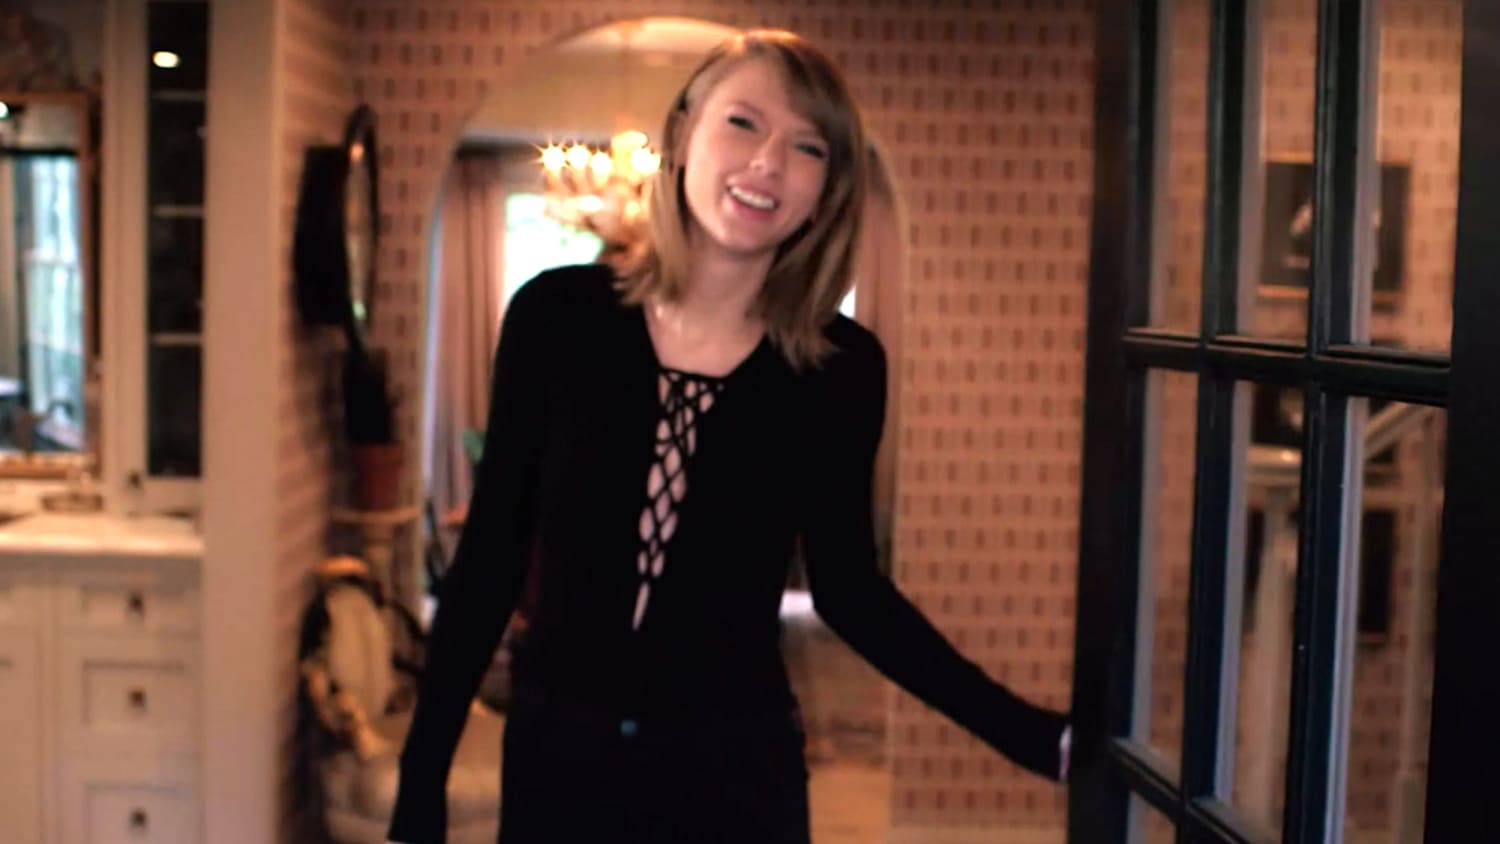 Taylor Swift Gives Tour Of Her California Home While Answering